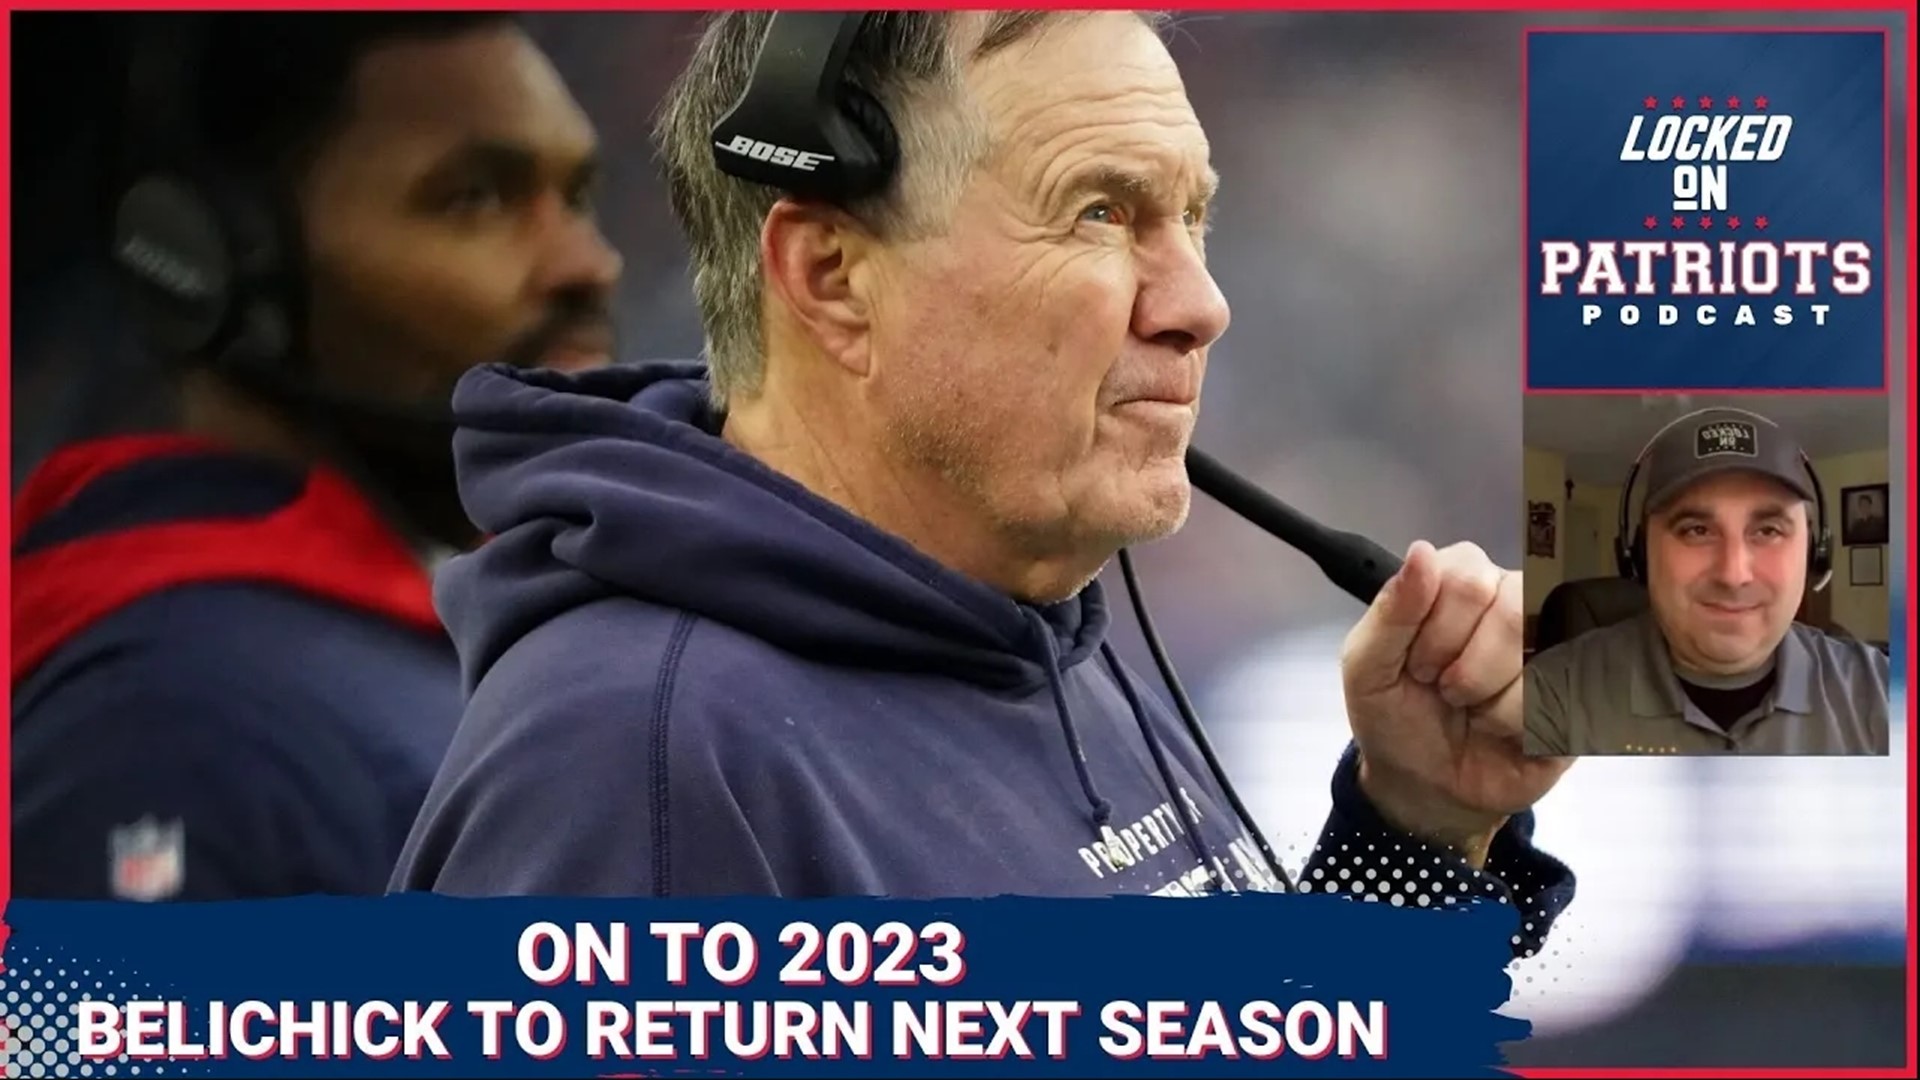 As the New England Patriots move on to 2023, head coach Bill Belichick apparently has every intention of returning to coach the team next season.